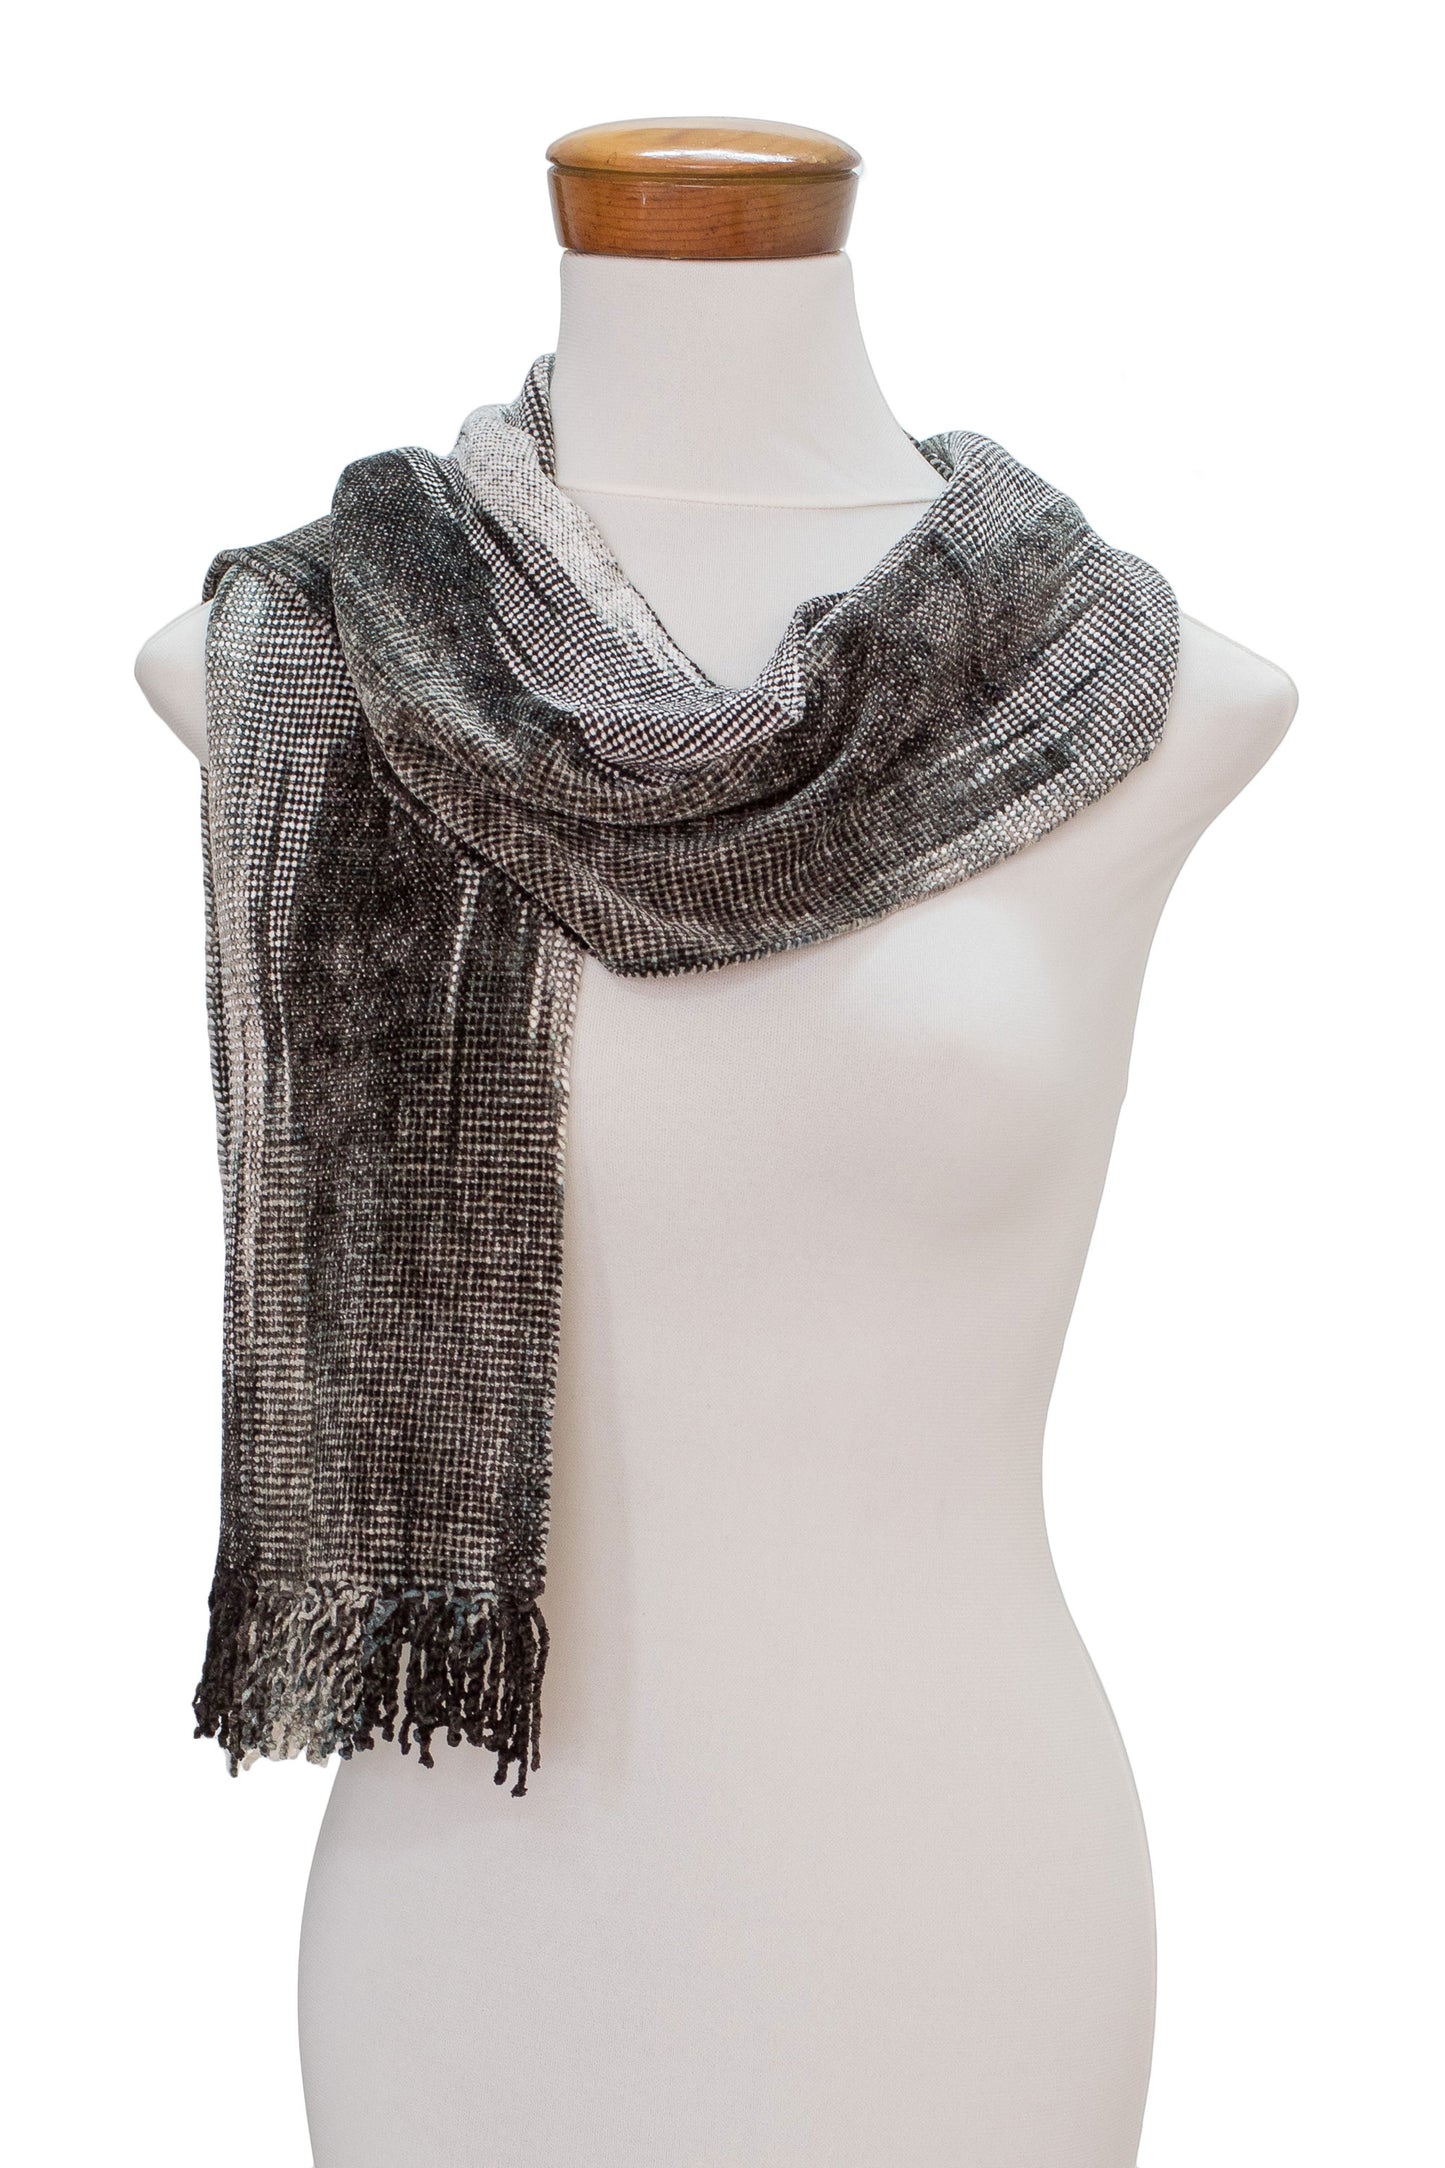 Infinite Universe Handwoven Grey Rayon Chenille Scarf from Guatemala